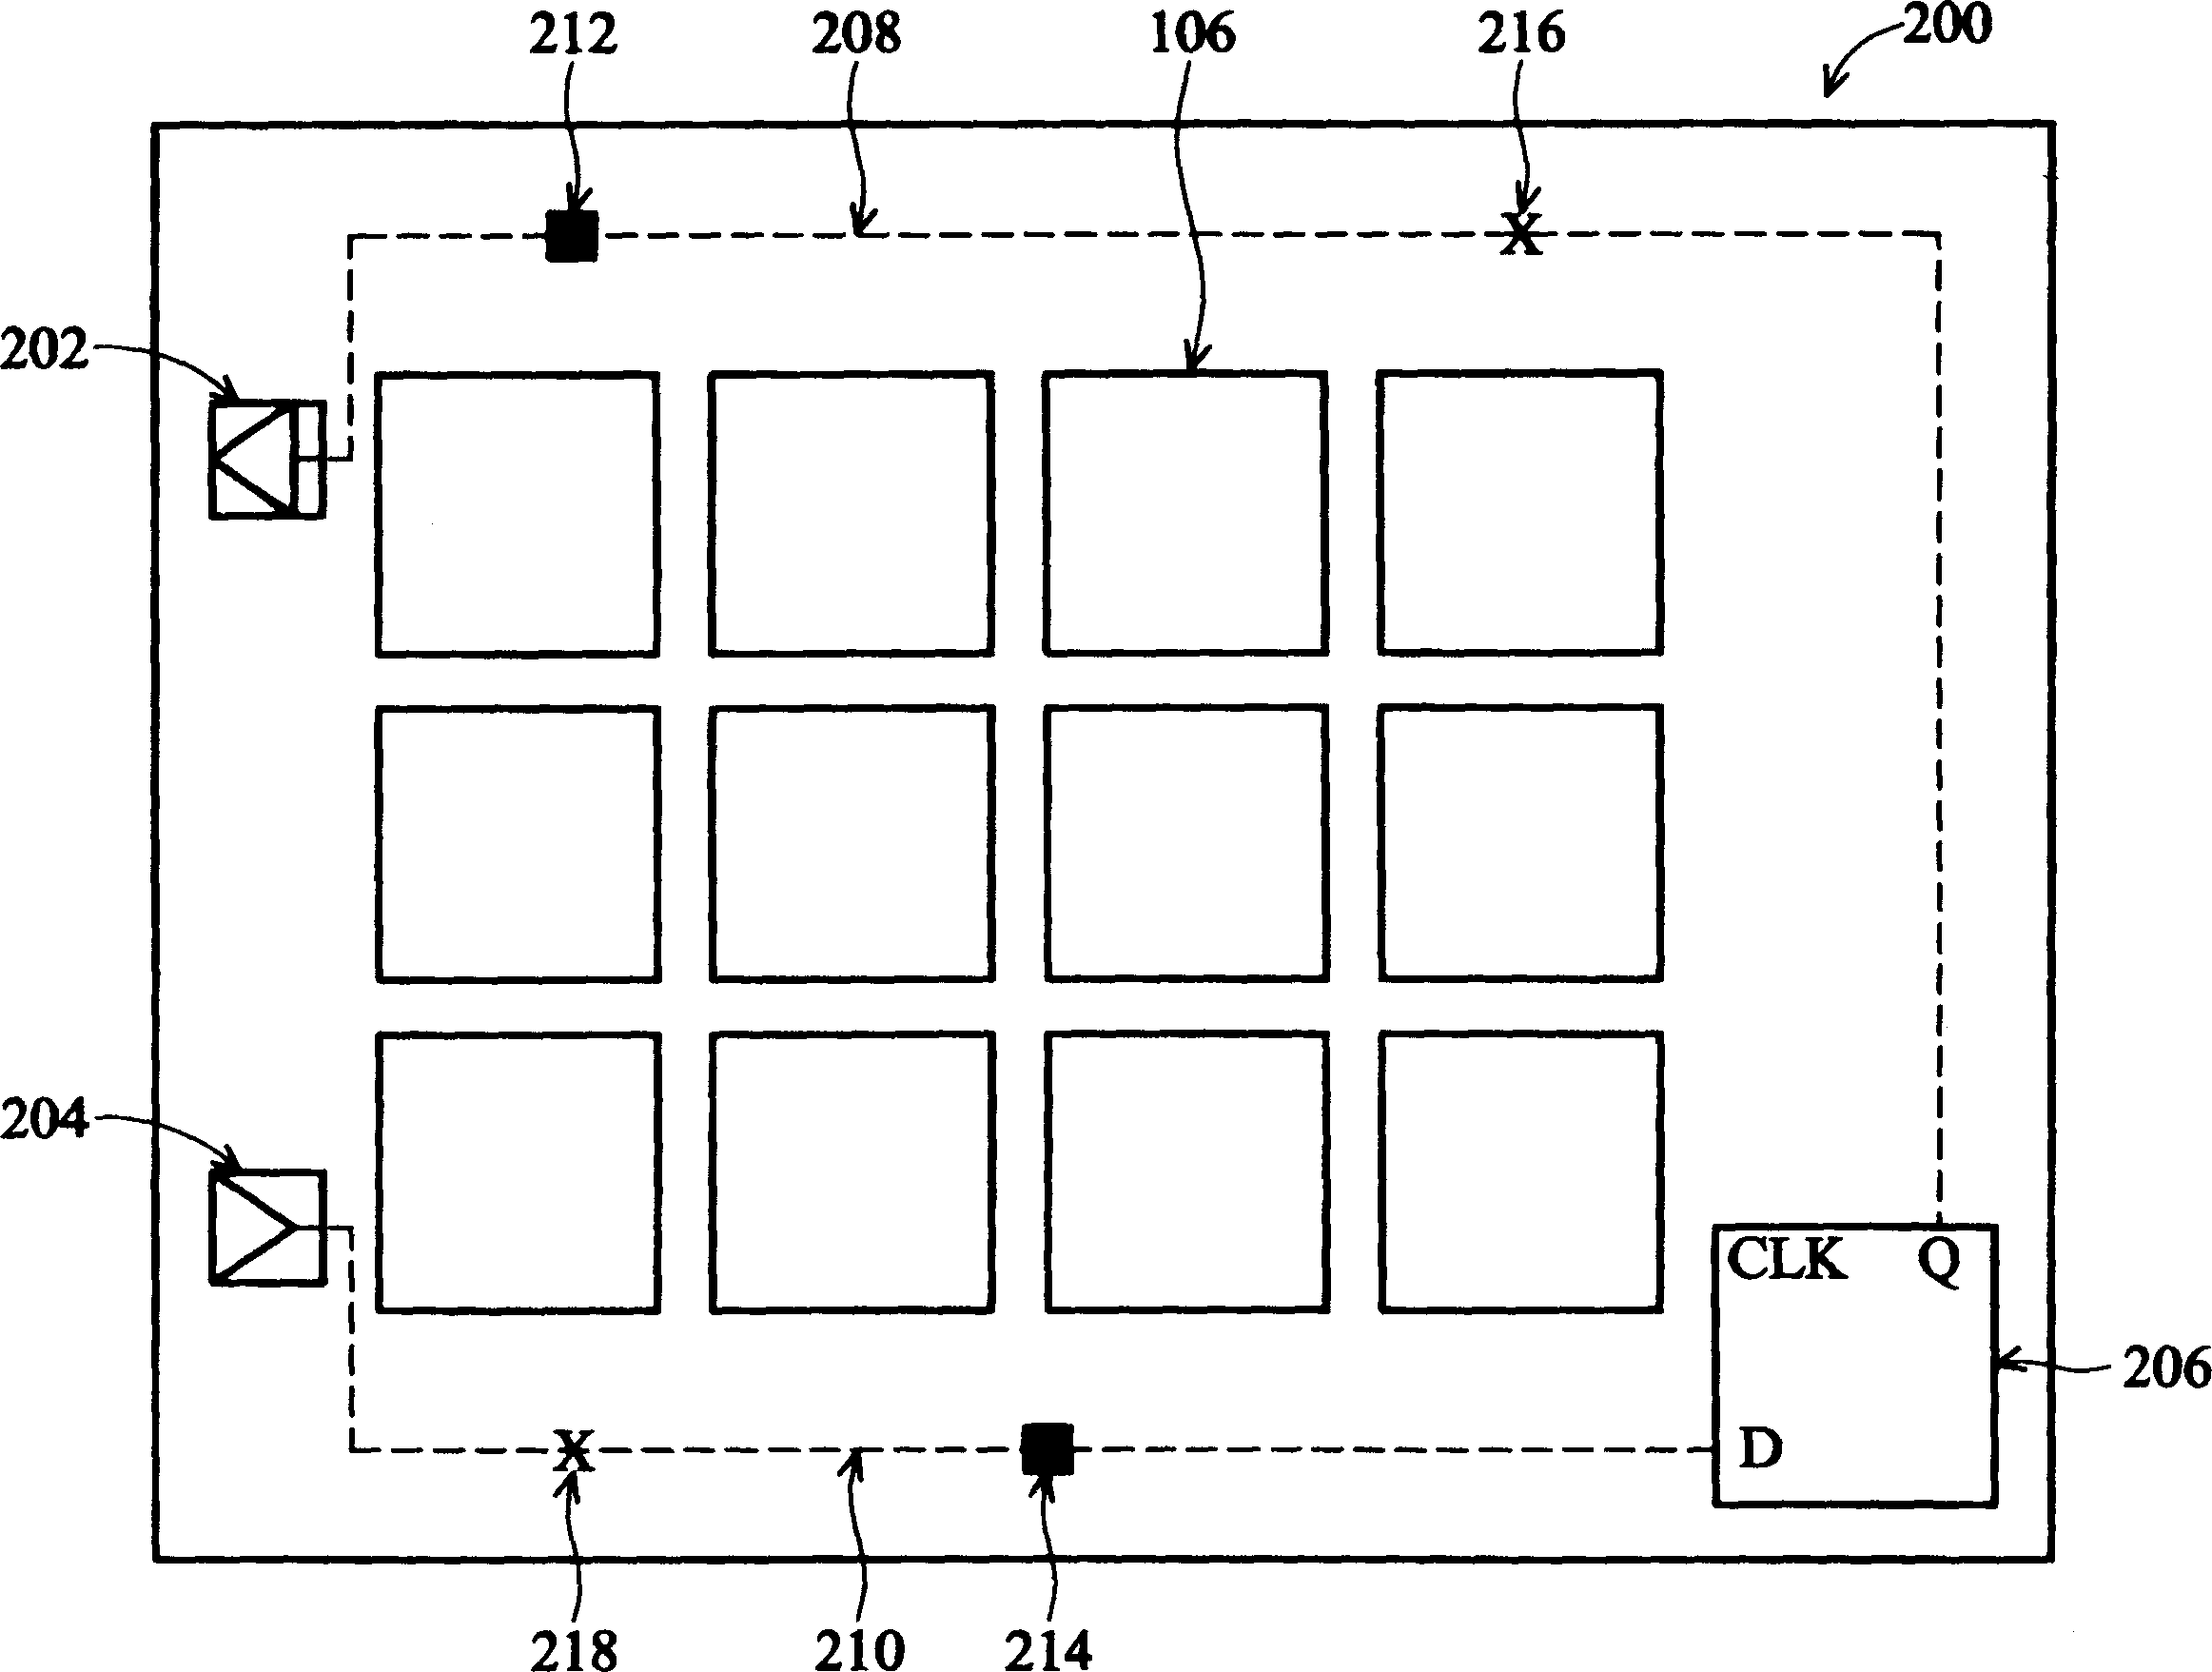 Integrated circuit design for routing an electrical connection